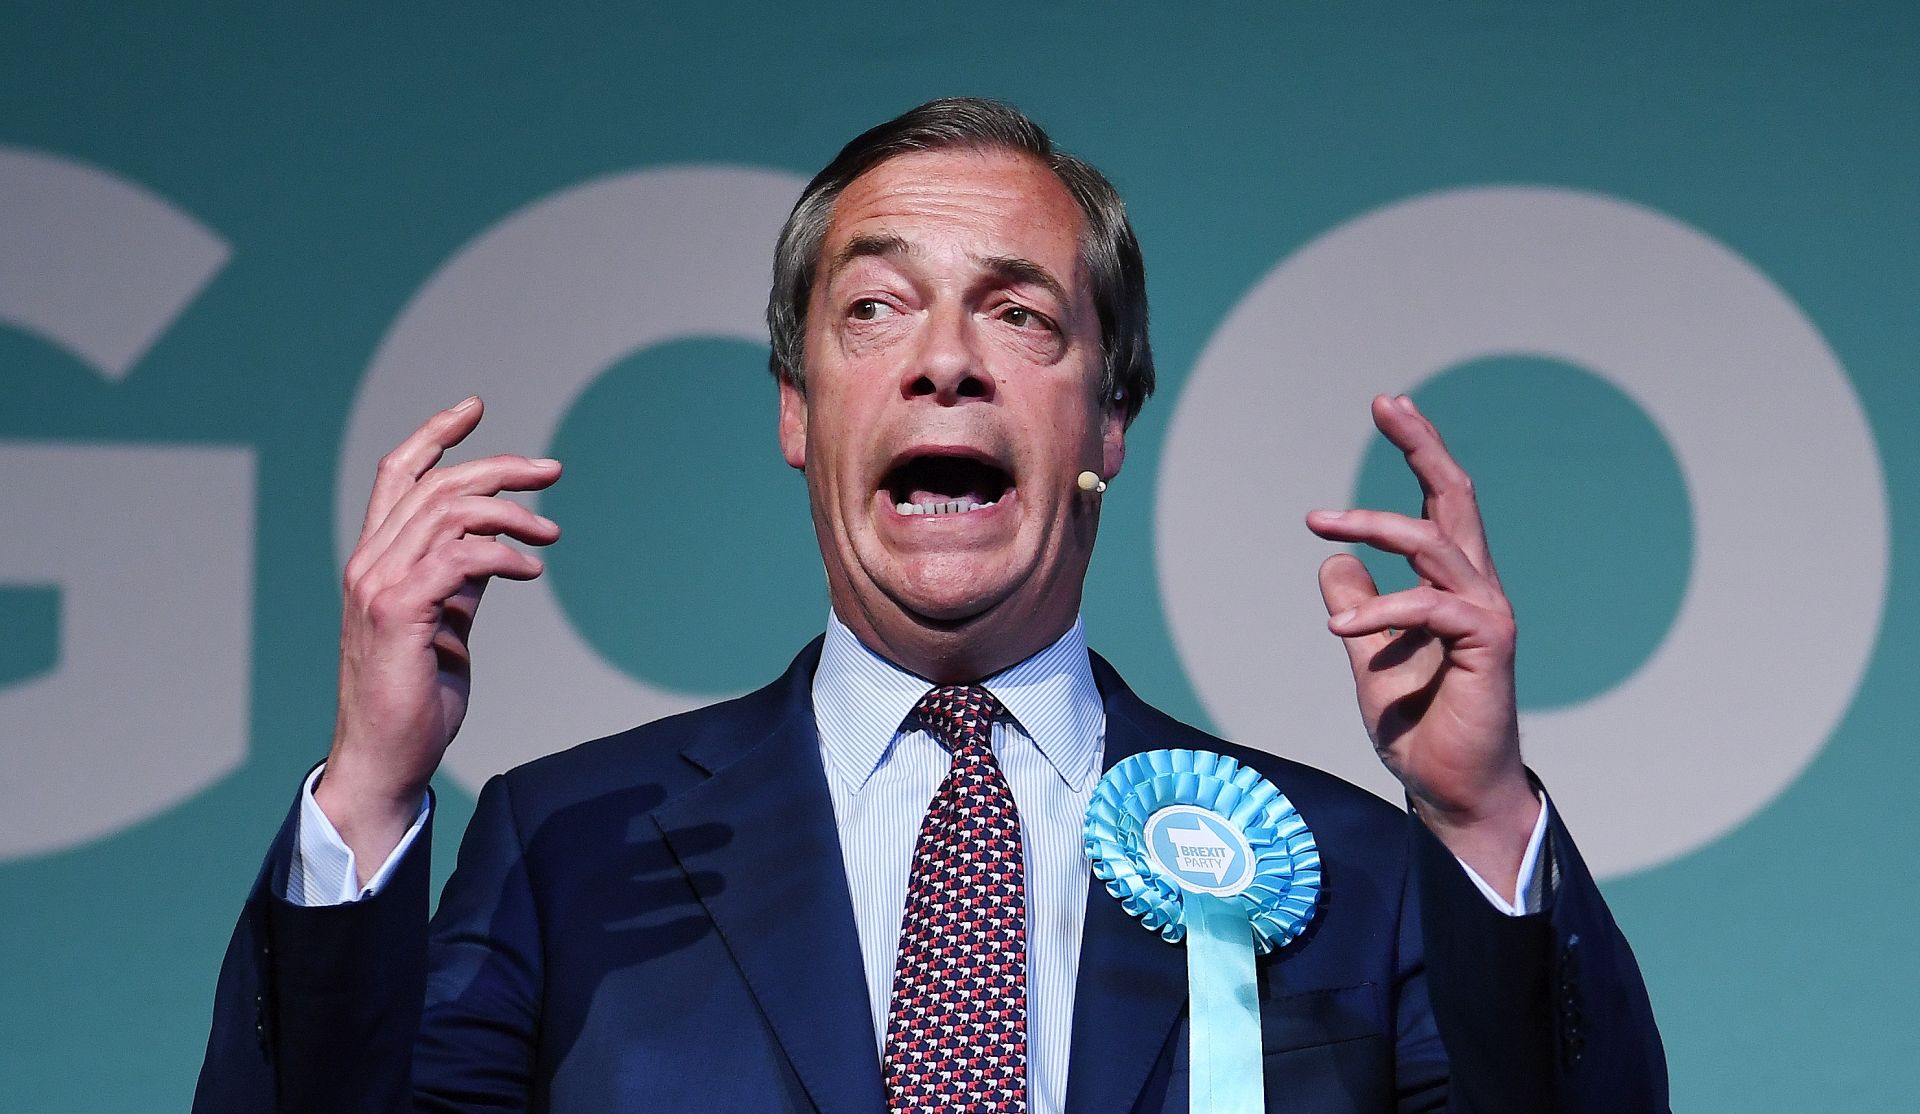 epa07590341 Brexit Party leader Nigel Farage delivers a speech to supporters during a rally at Olympia in London, Britain, 21 May 2019. EU elections are 23 May.  EPA/ANDY RAIN